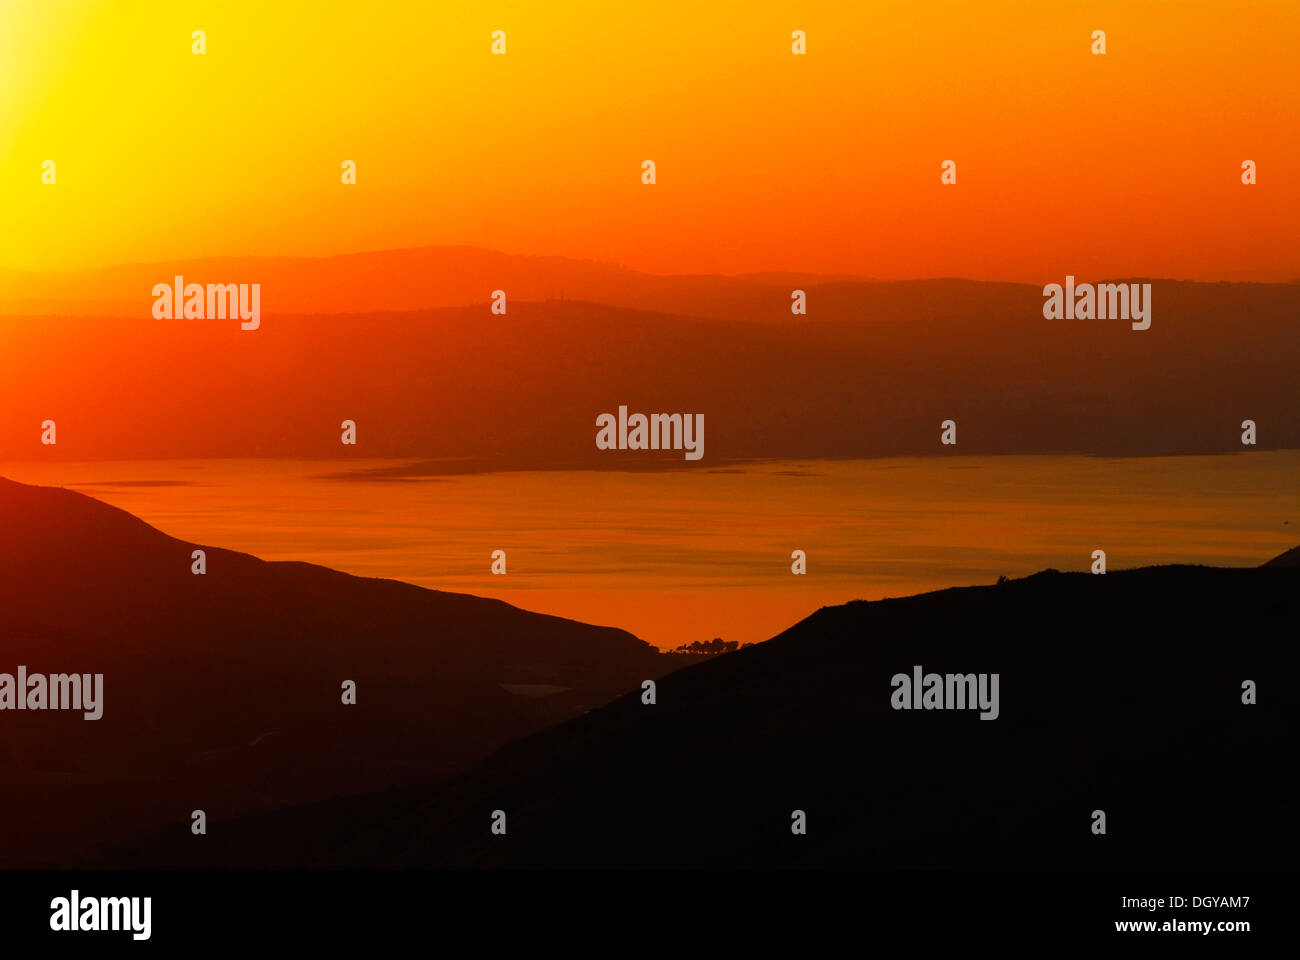 Sea of Galillee, Sunset landscape in northern Israel Stock Photo